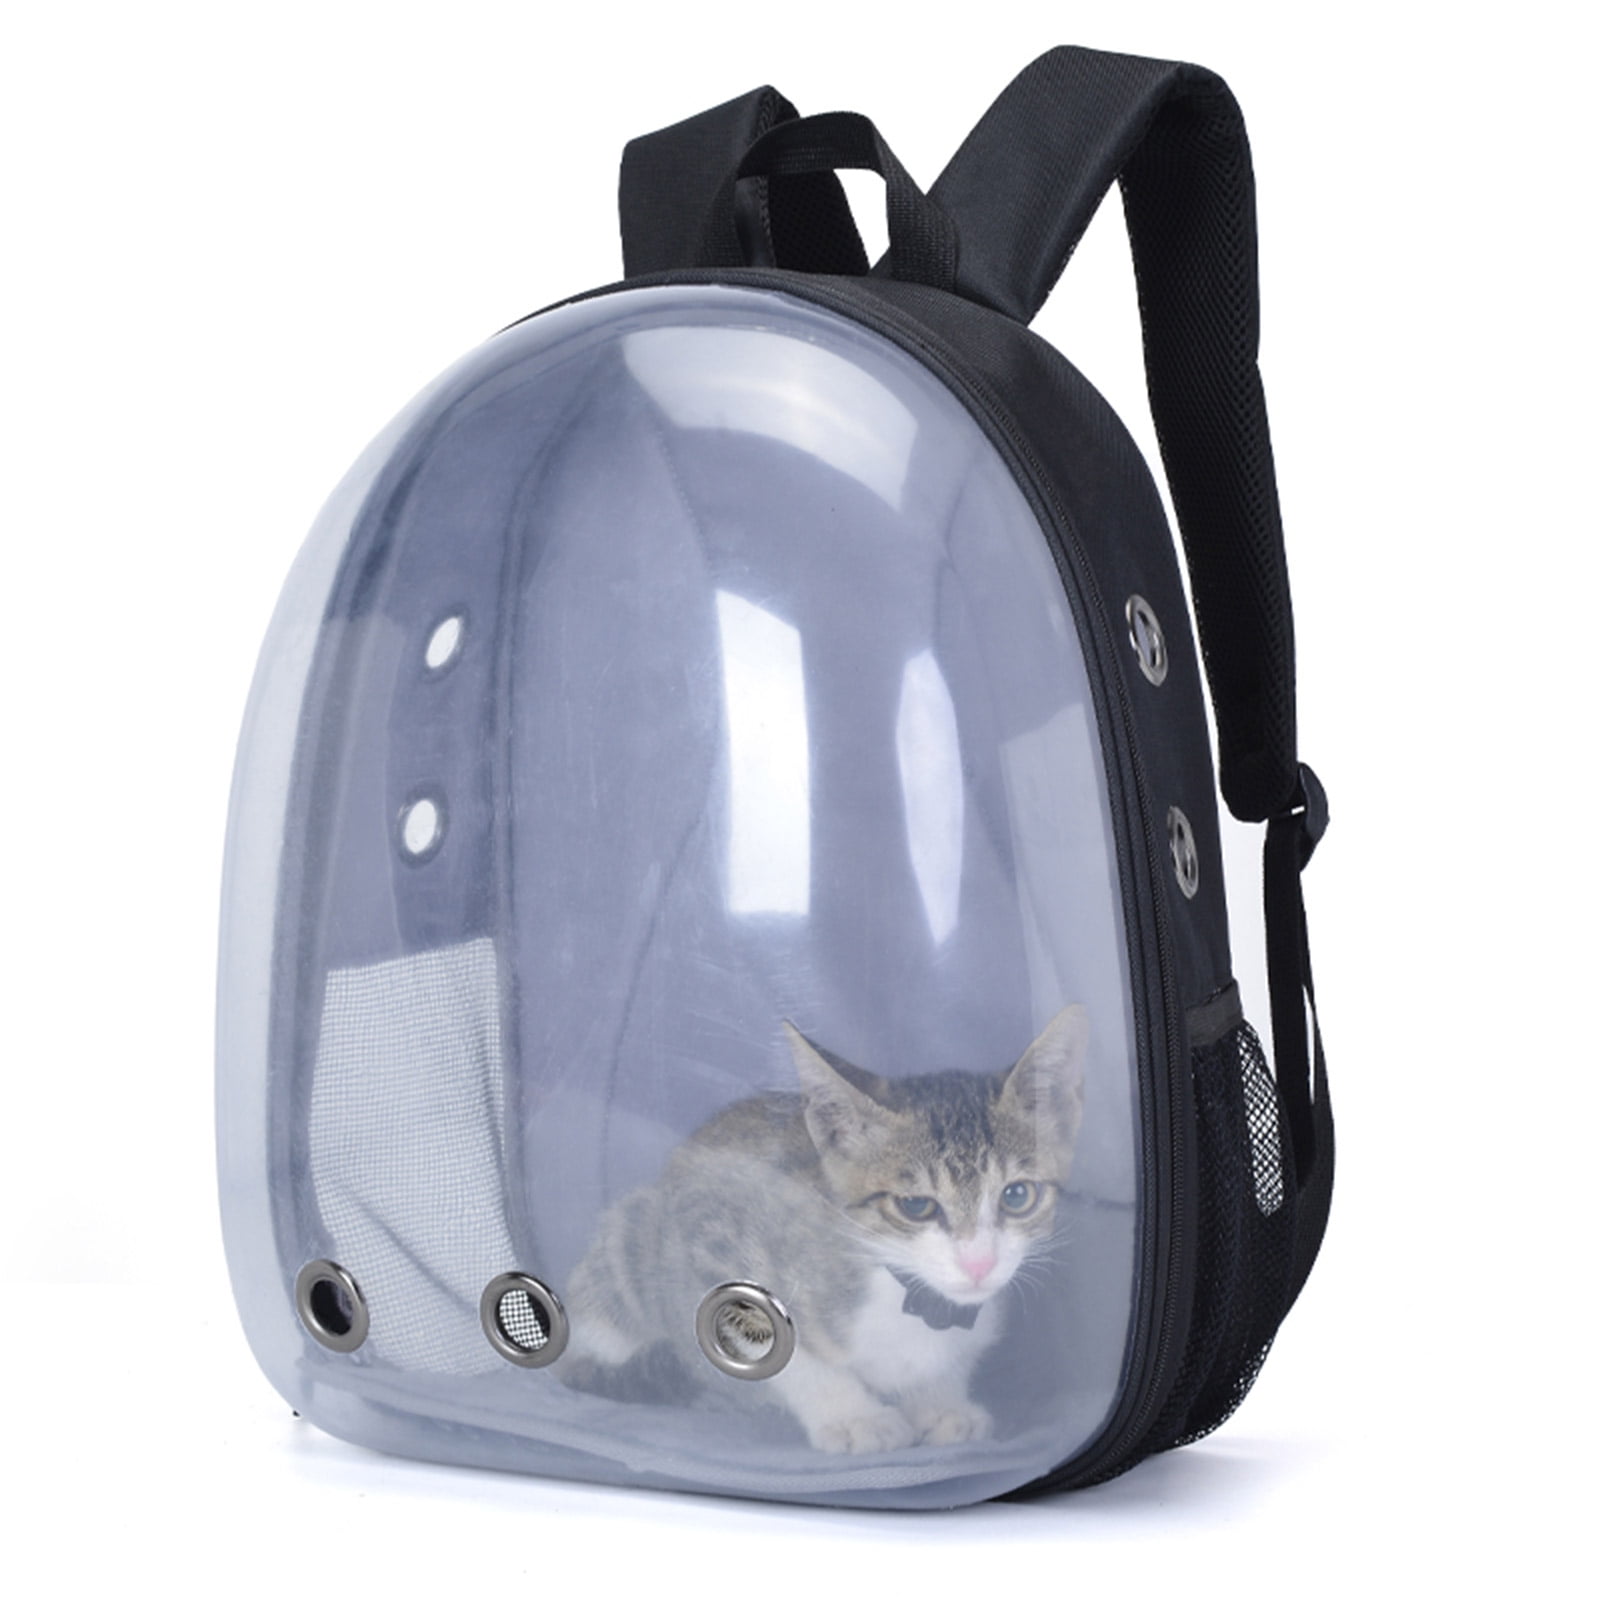 Soft-Sided Cat Travel Carrier for Cats and Small Dogs Texsens Airline Approved Pet Carrier Dark Grey